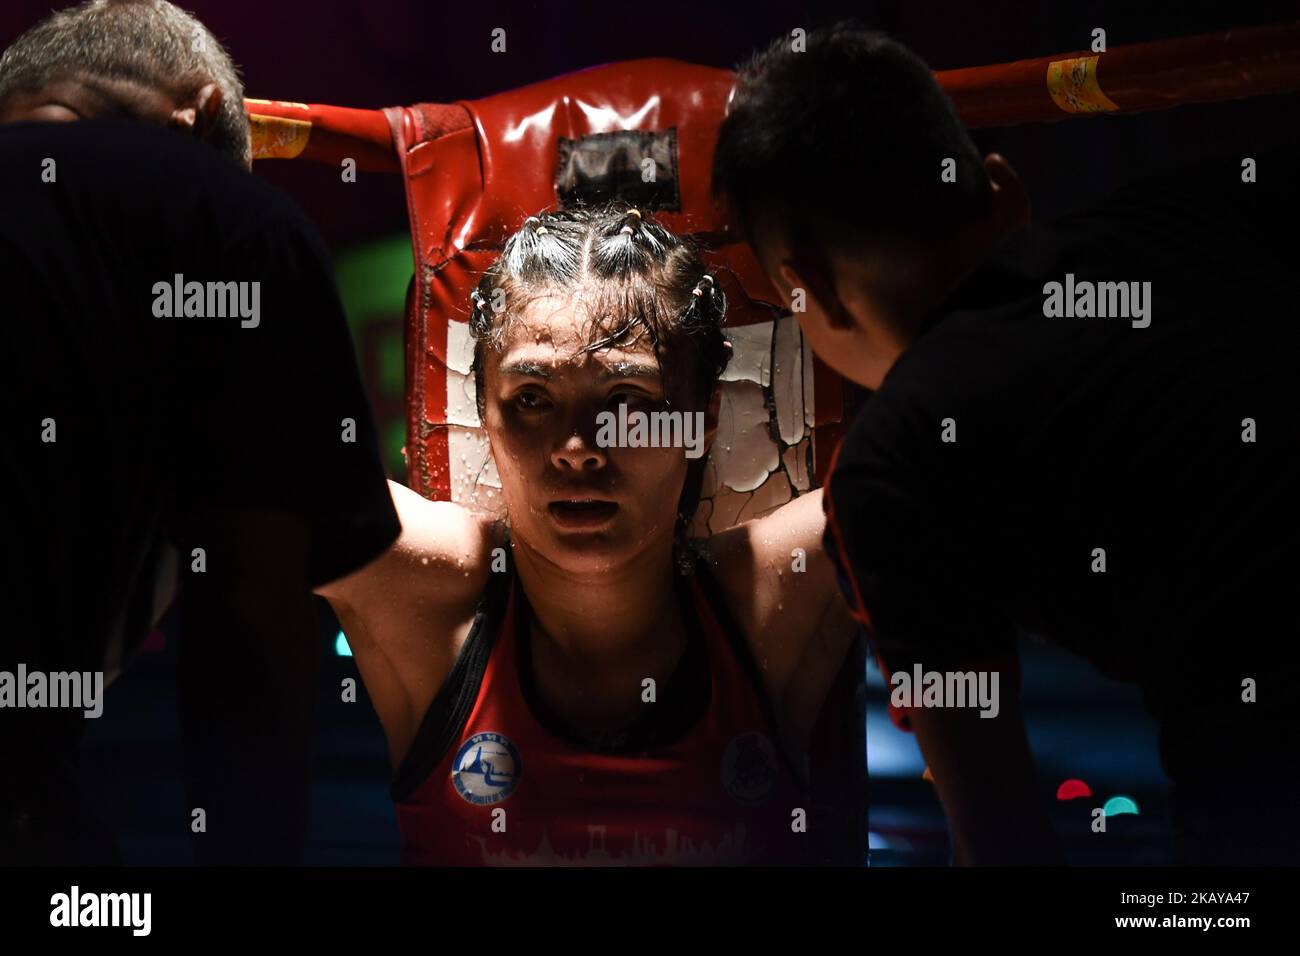 Chabaphai ahead of the last round during a Thai boxing combat between against Gwungthong, in Ladies 58kg category, during Muaythai Monday Evening International Thai Boxing Gala in Thaphae Stadium in Chiang Mai. On Monday, June 11, 2018, Chiang Mai, Chiang Mai Province, Thailand. (Photo by Artur Widak/NurPhoto)  Stock Photo